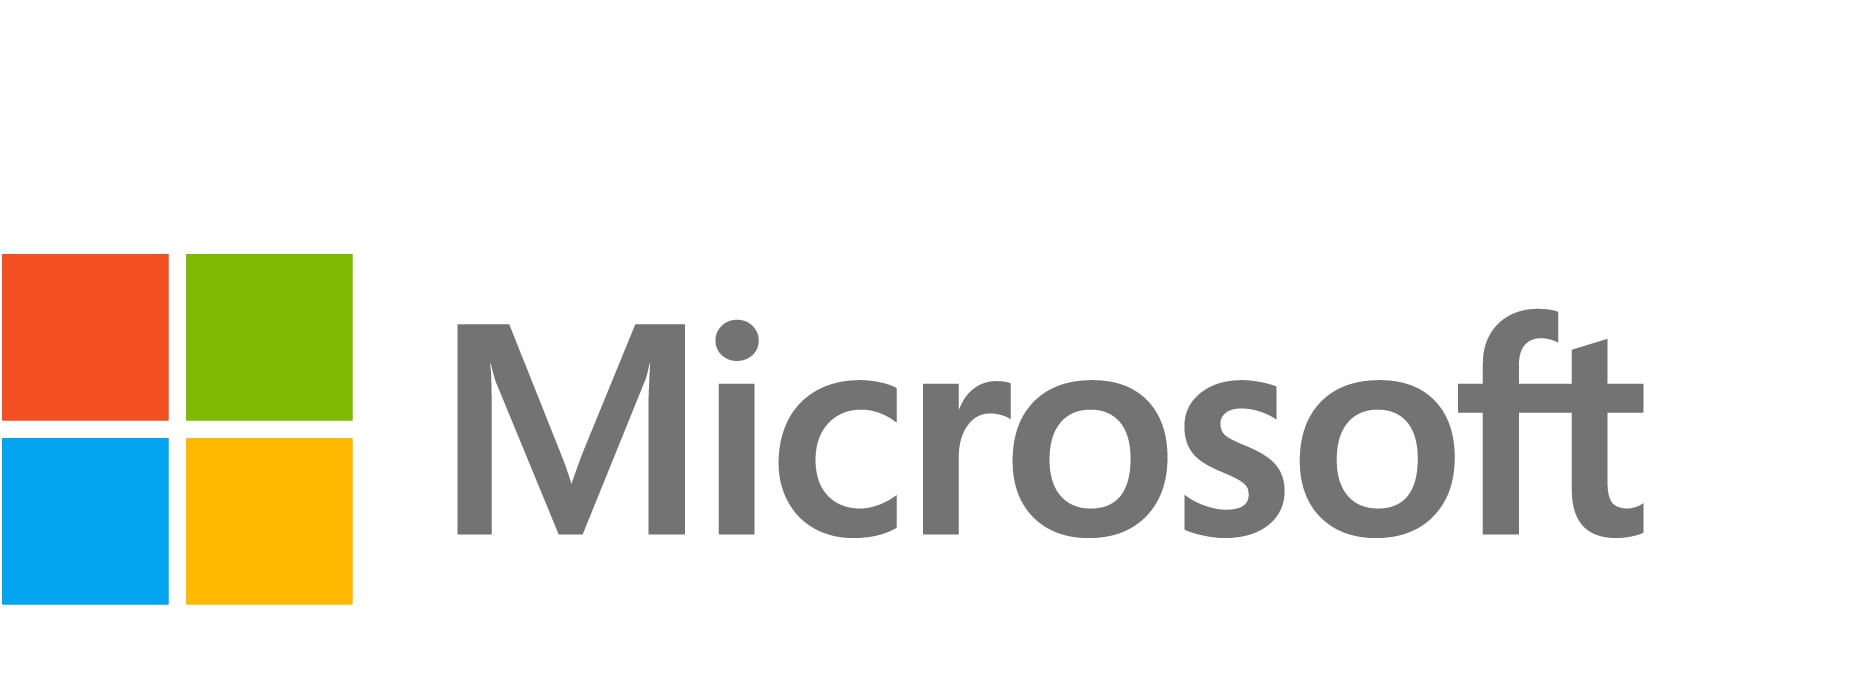 Microsoft Power Pages - subscription license (1 month) - 500 anonymous user